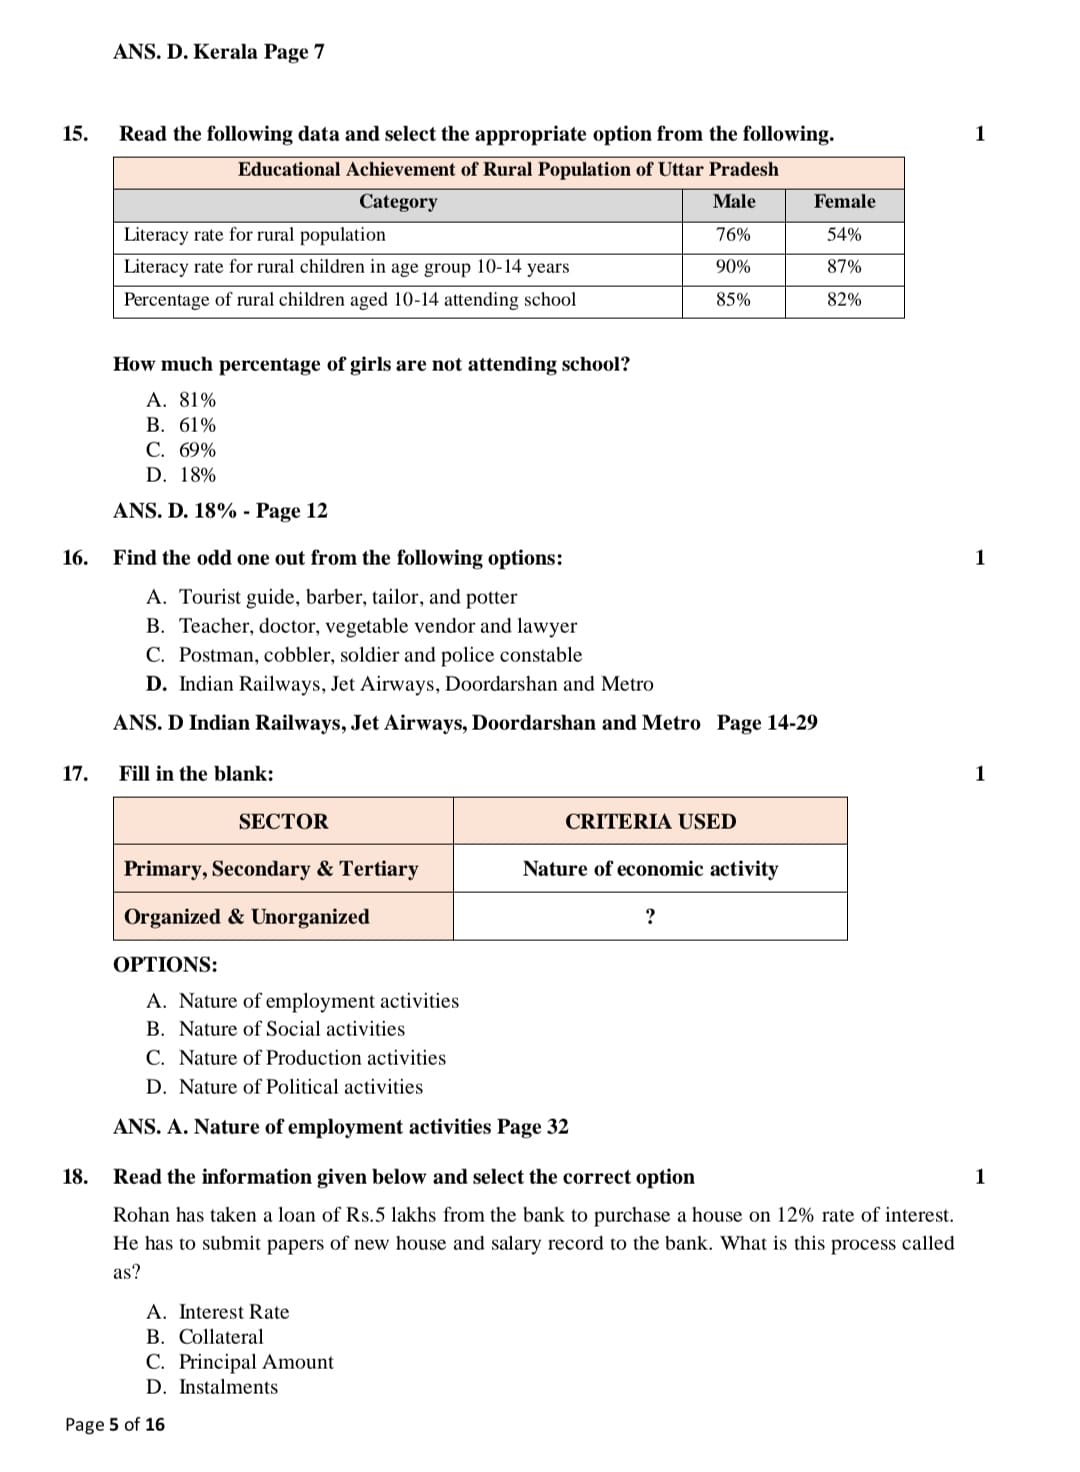 cbse class 10 social science official sample question paper5